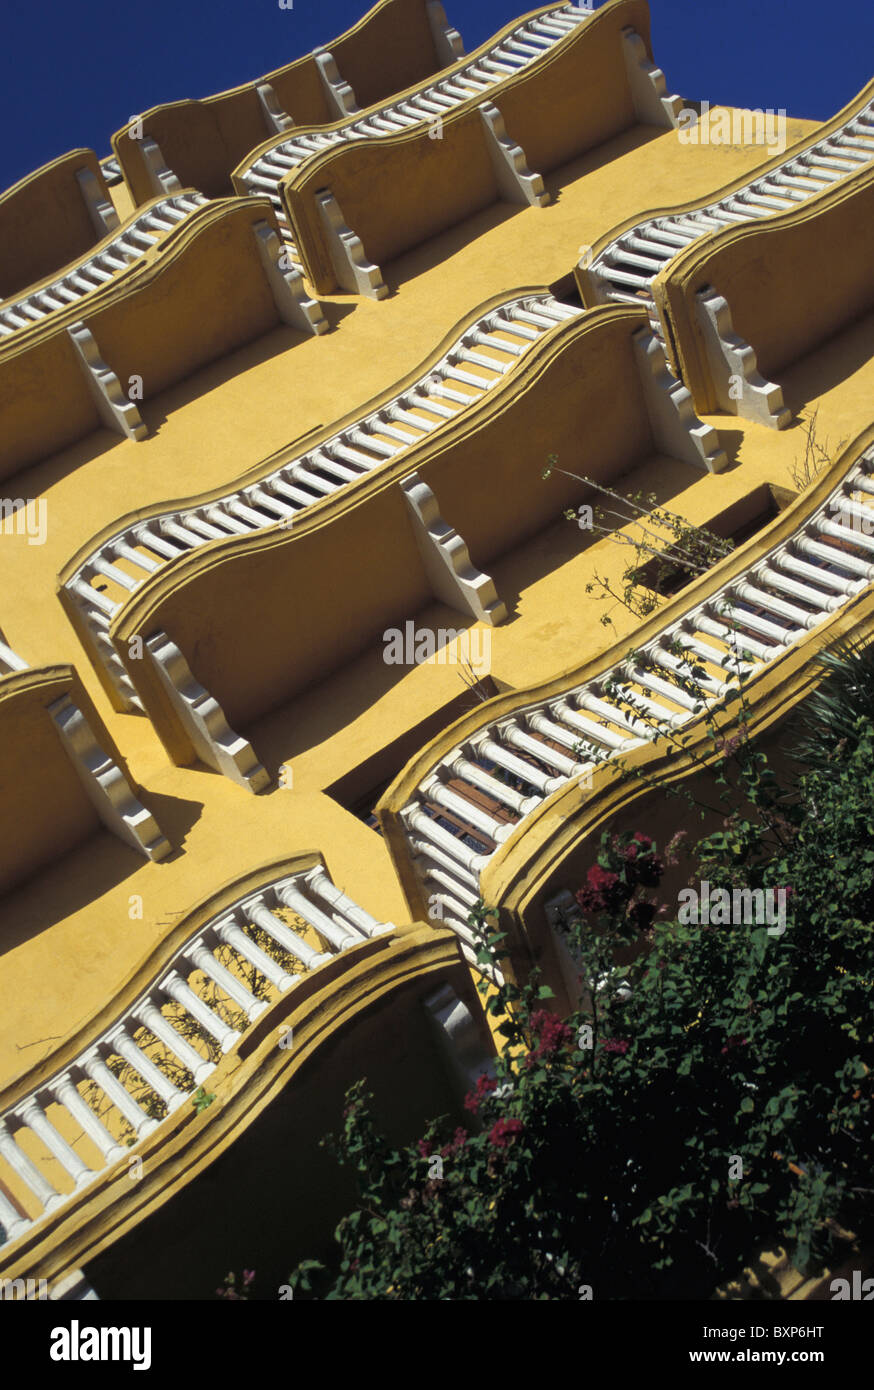 Balconies In Plaza De Los Coches, Low Angle View Stock Photo